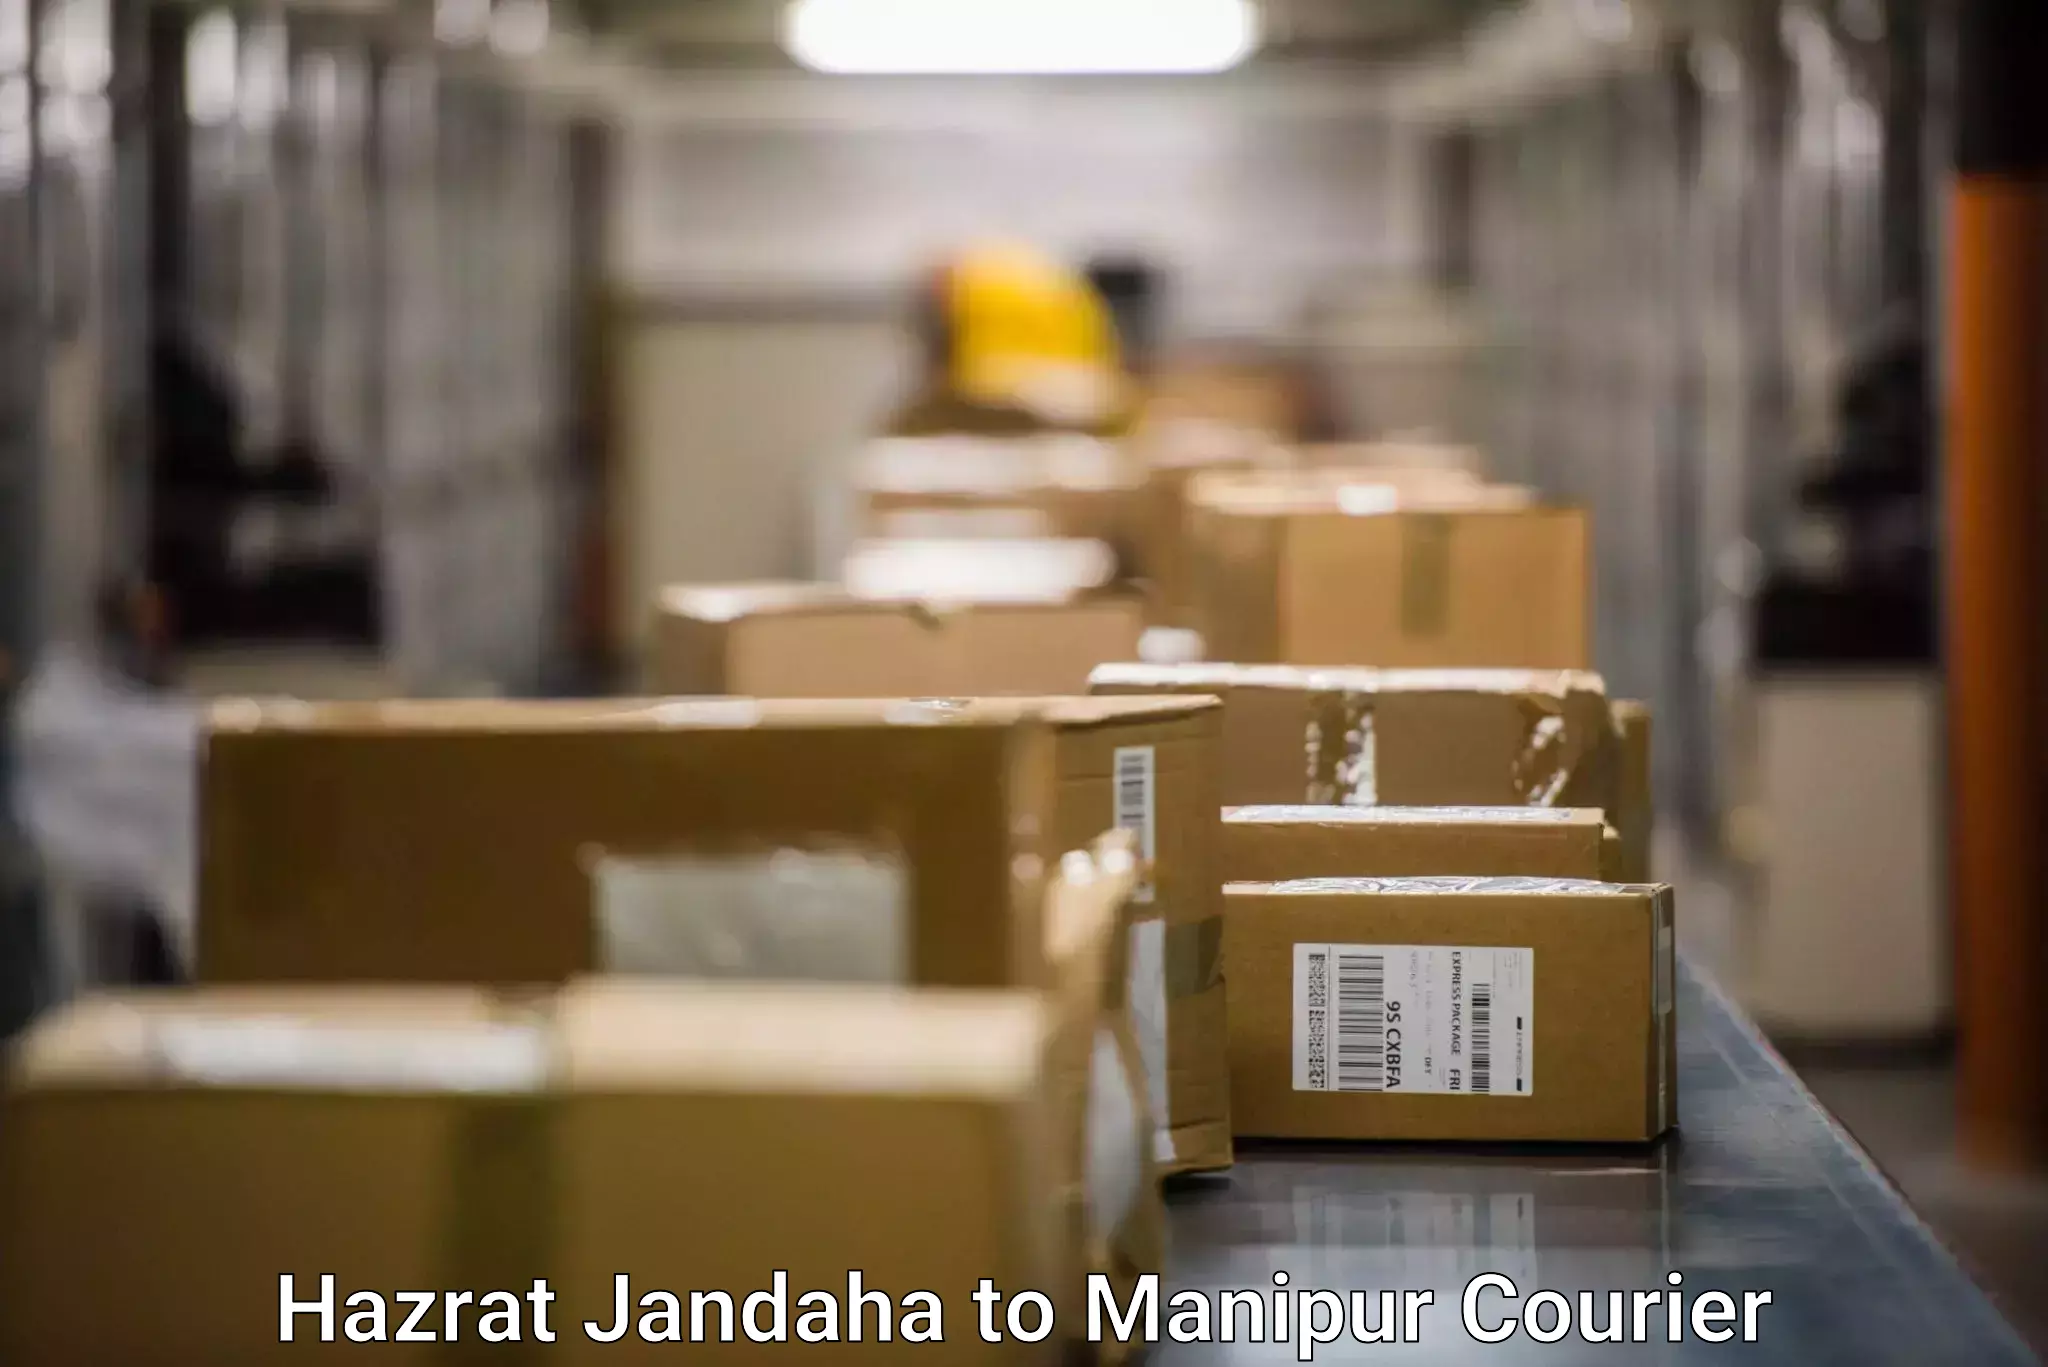 Next-day delivery options Hazrat Jandaha to Manipur